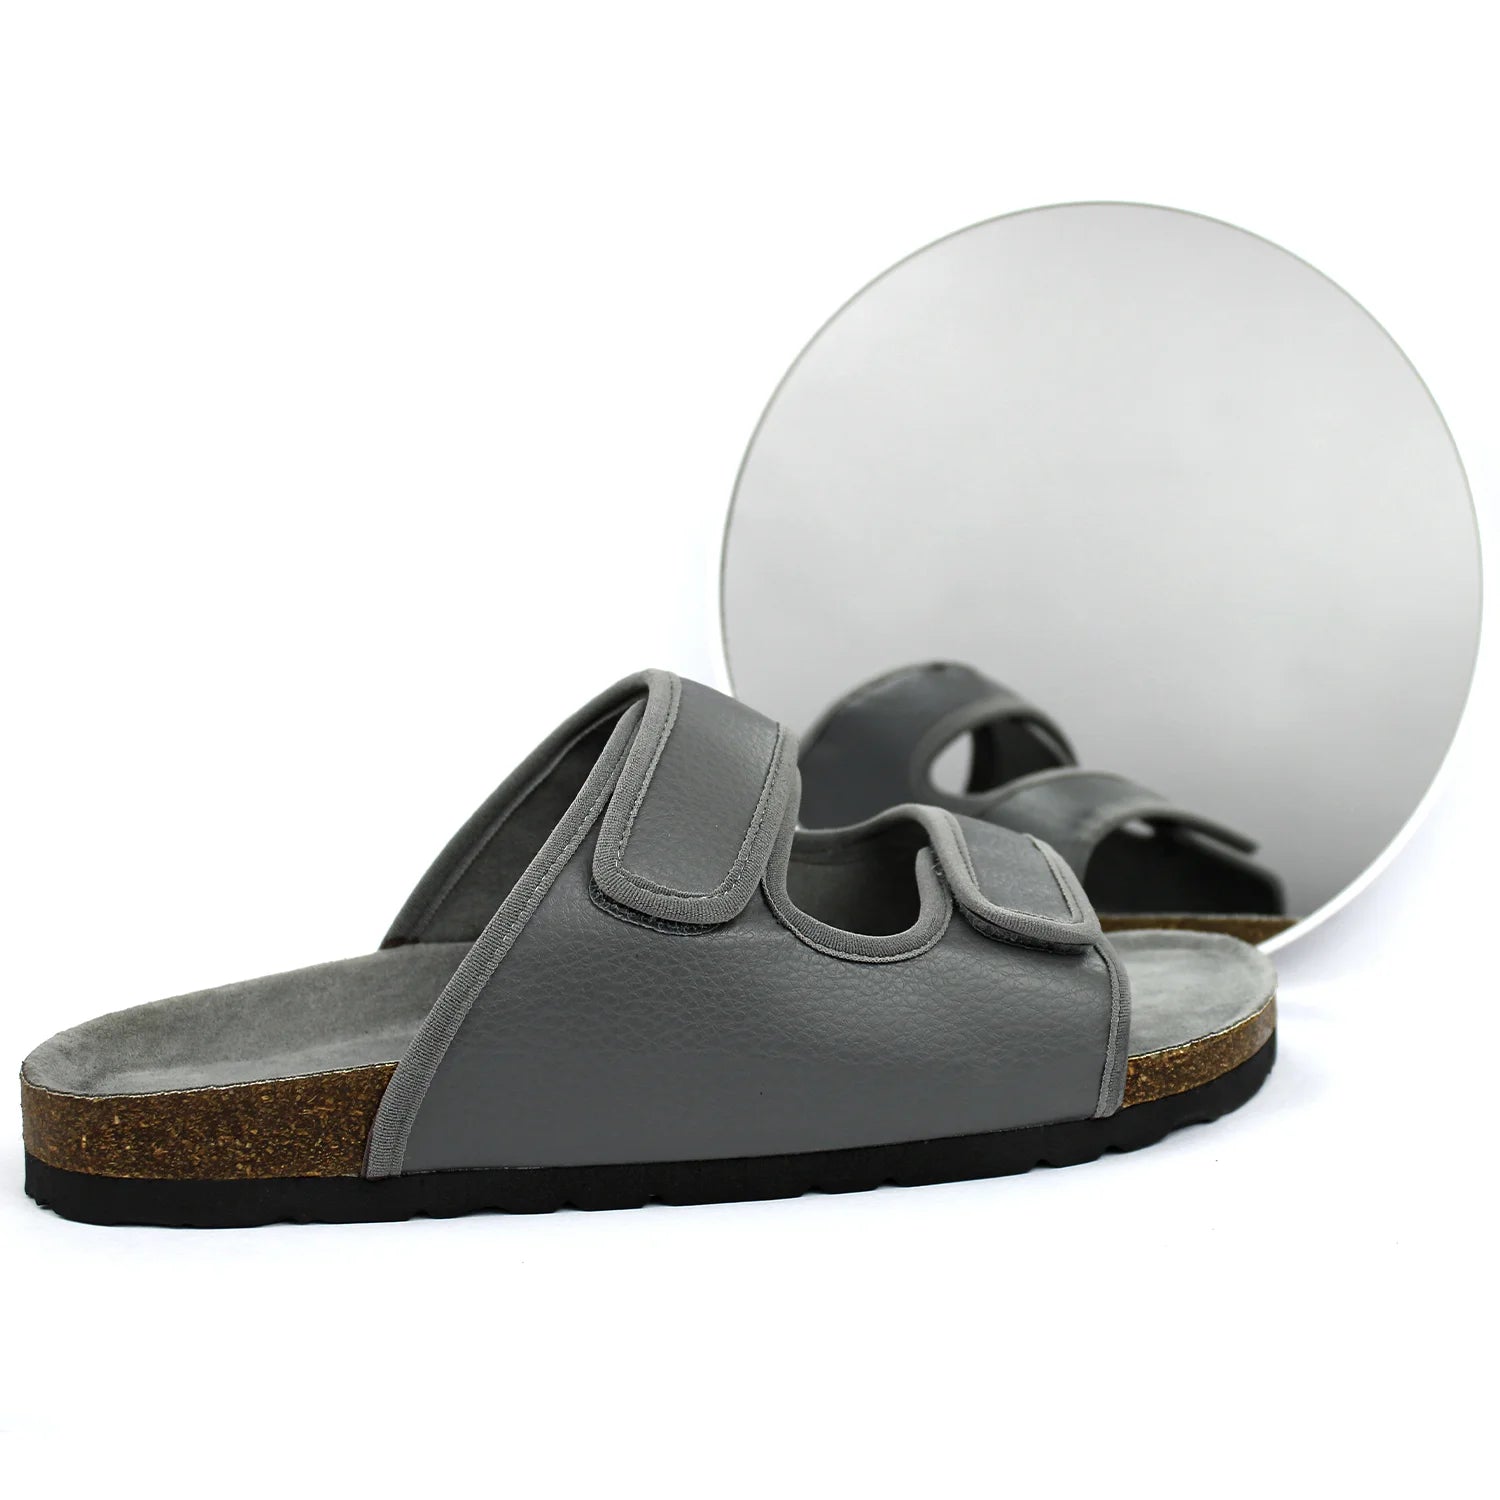 Cloudy Grey men's cork sandals, designed for both fashion and functionality in various settings